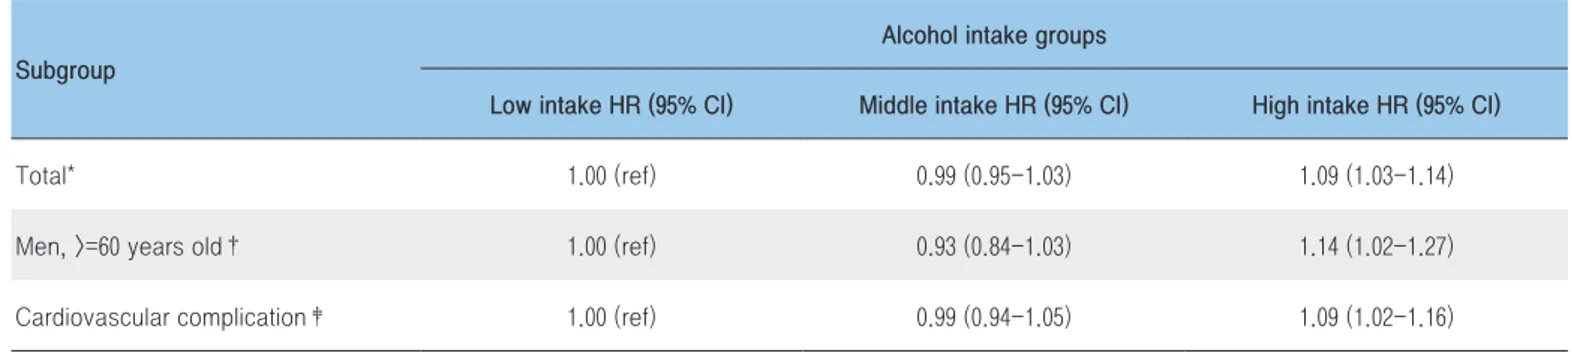 Table 11. Hazard ratios (HR) and 95% confidence intervals (CI) of complications among diabetic patients for higher alcohol  intake groups compared to the low intake group 